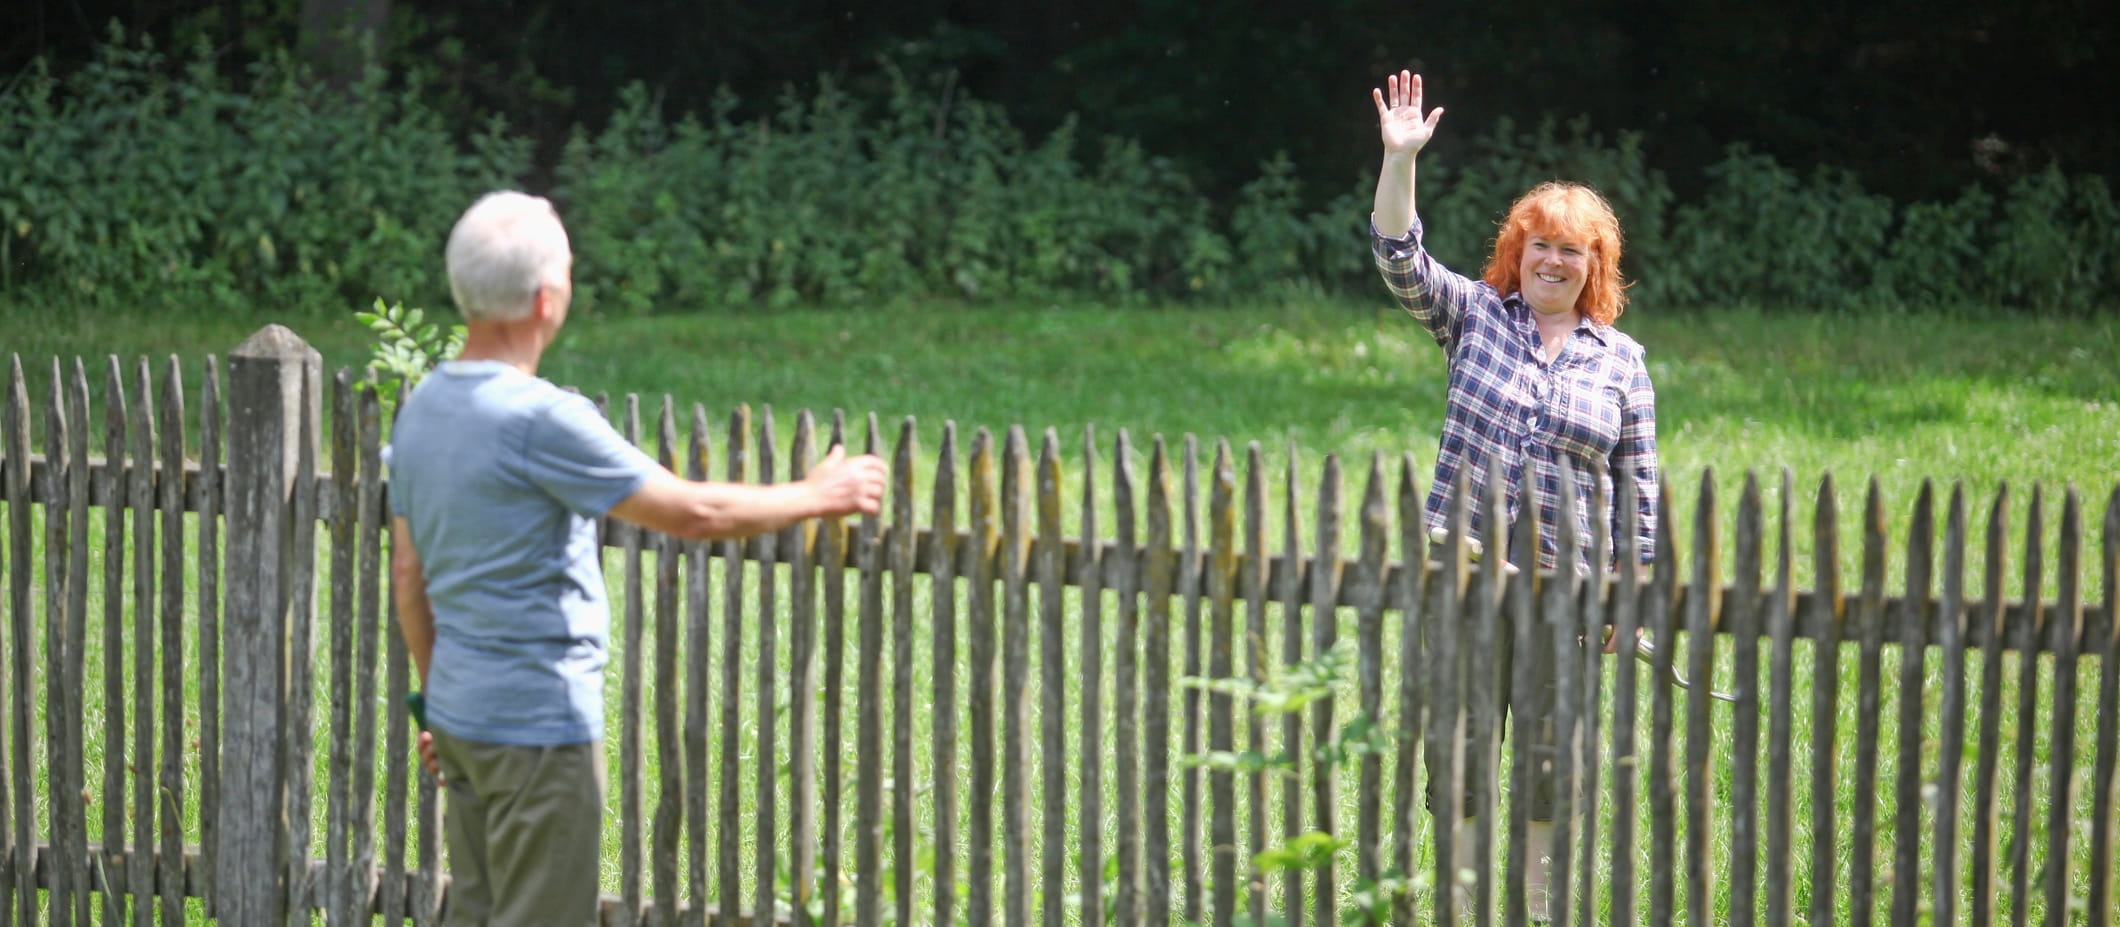 two neighbours waving form across a fence